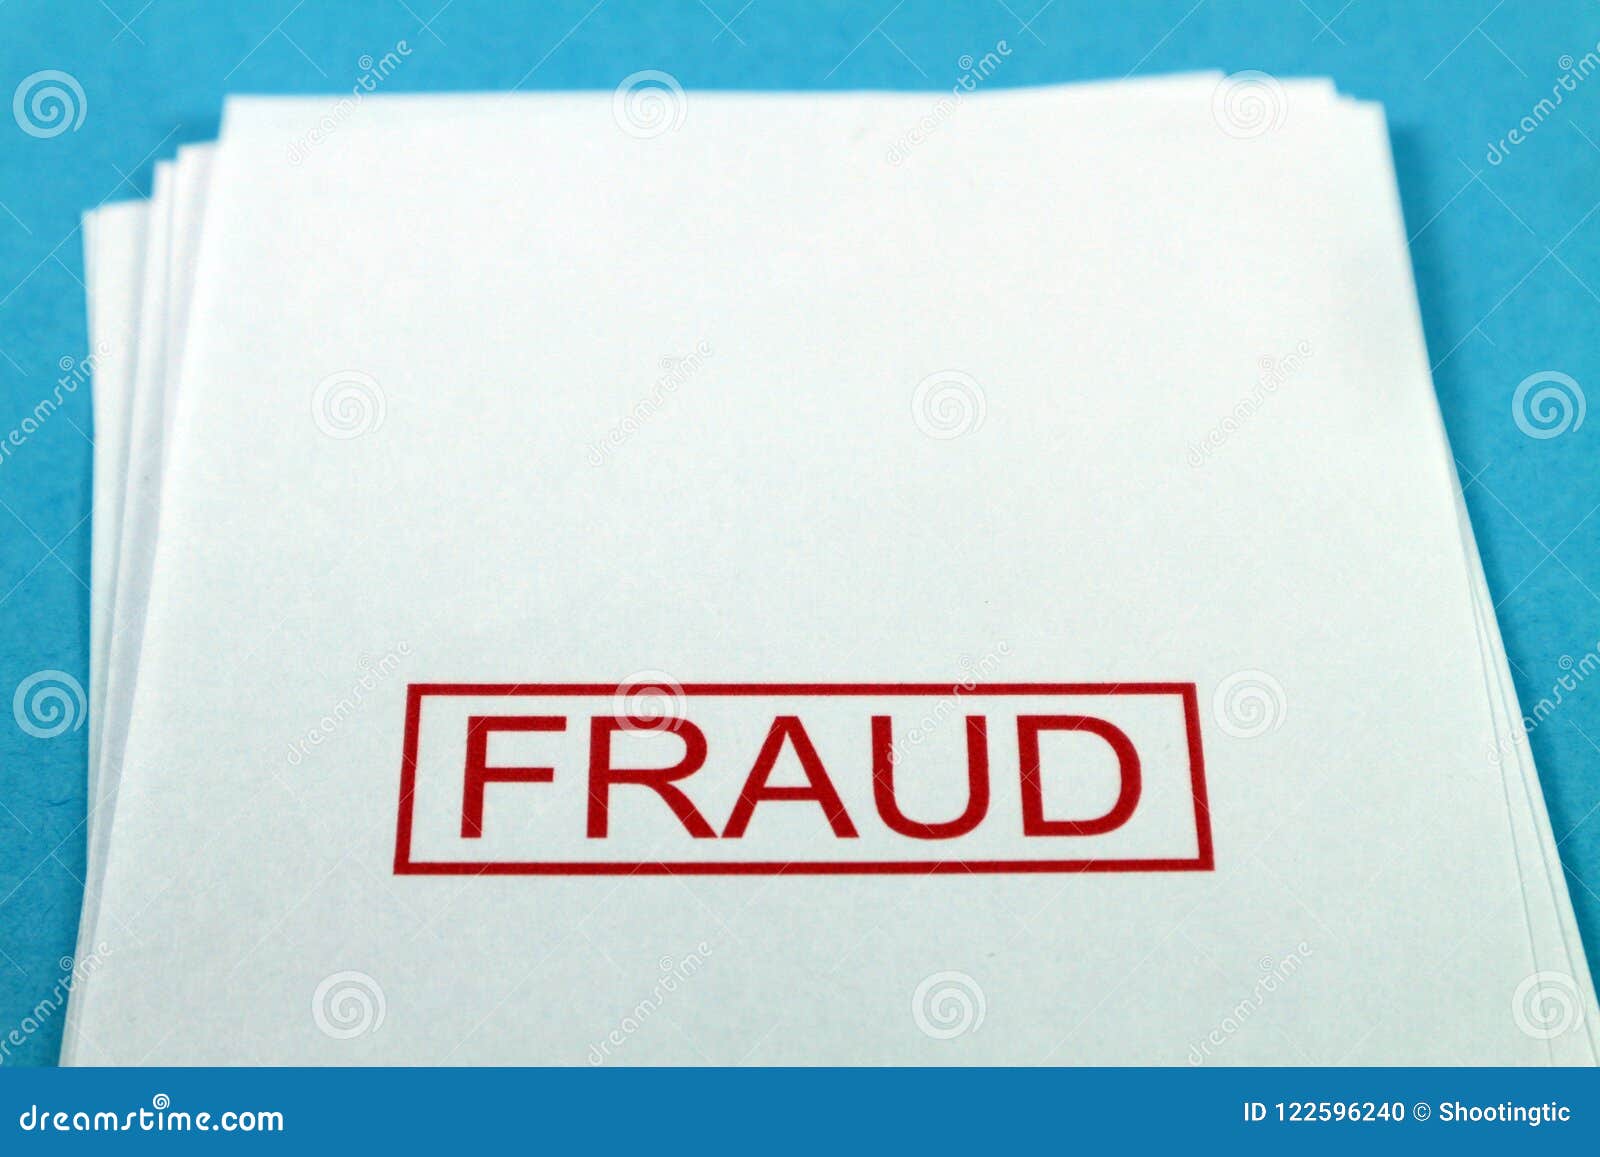 Fraud Word On A Paper On A Blue Desk Stock Photo Image Of Blue